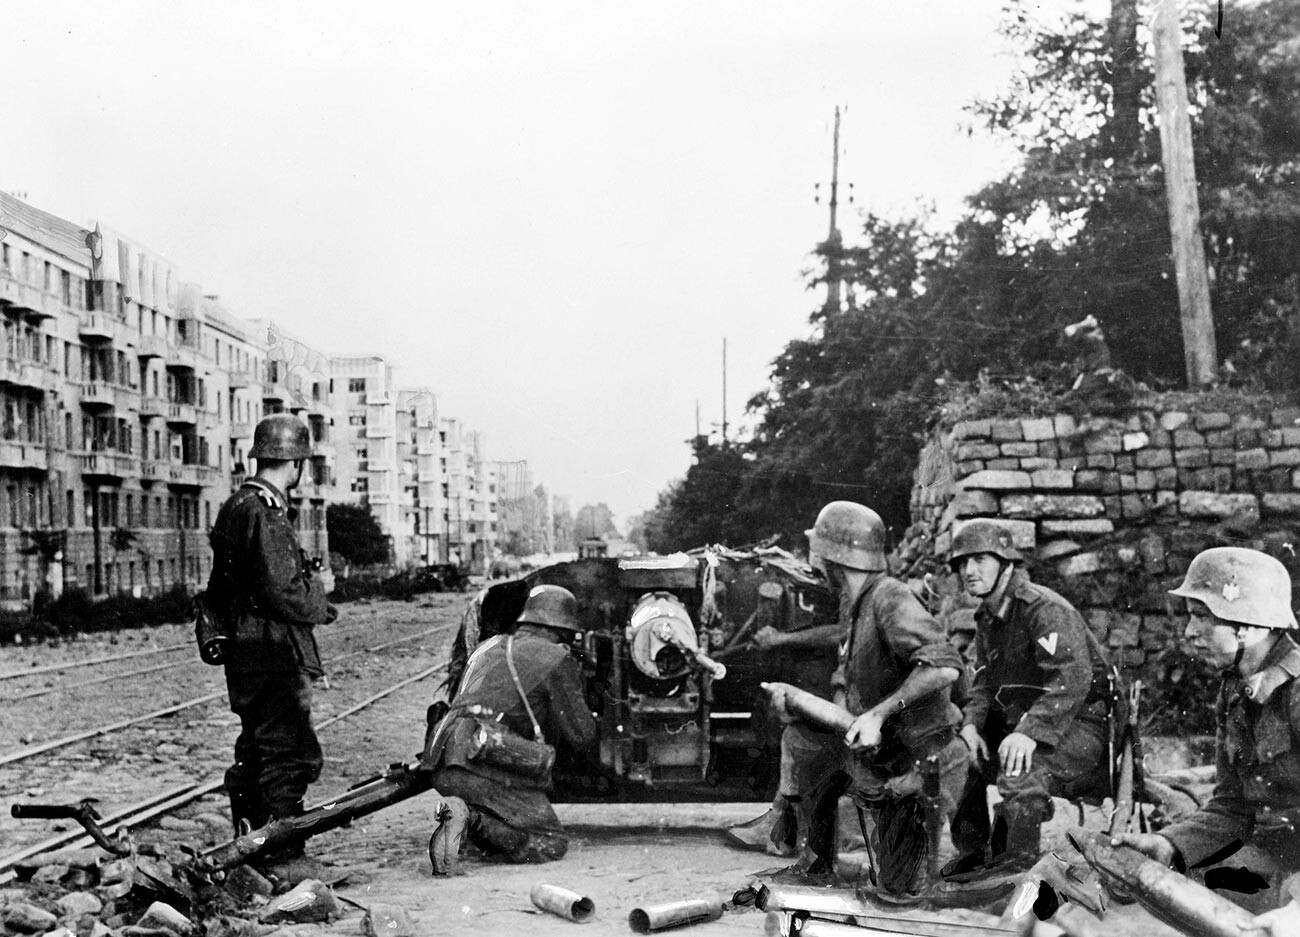 Recapture of Rostov-on-Don by German troops in July 1942.